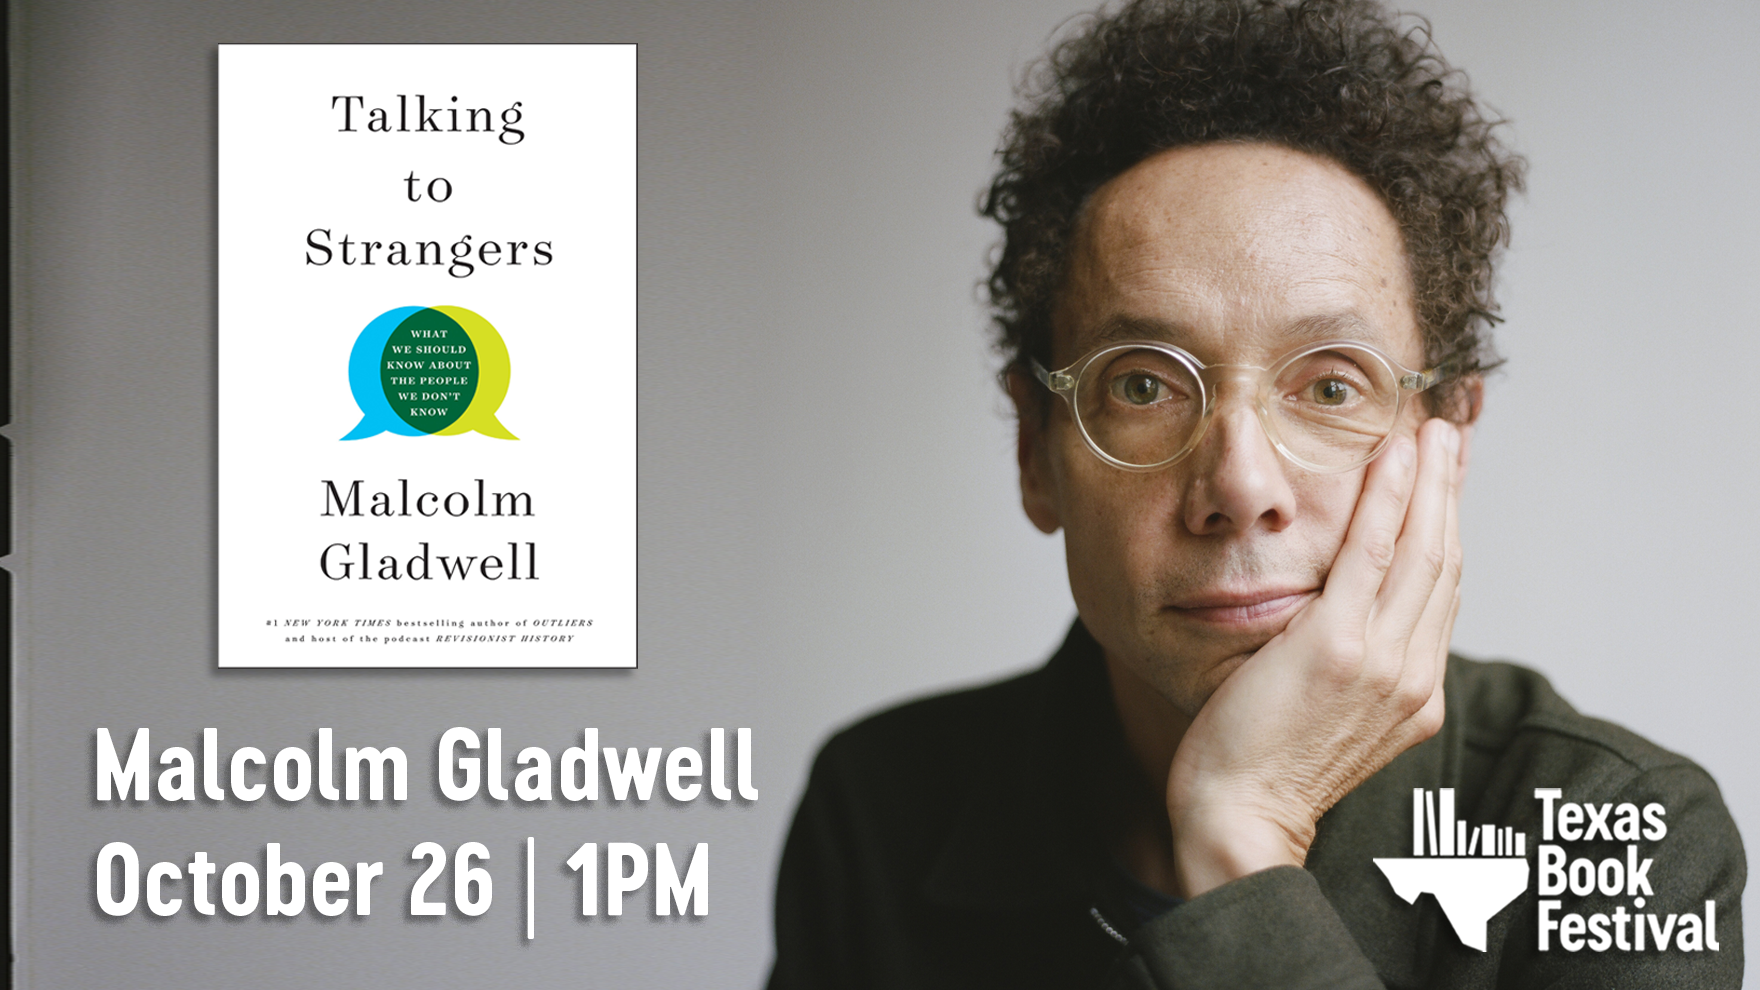 SOLD OUT – Malcolm Gladwell in Austin – October 26, 1 PM